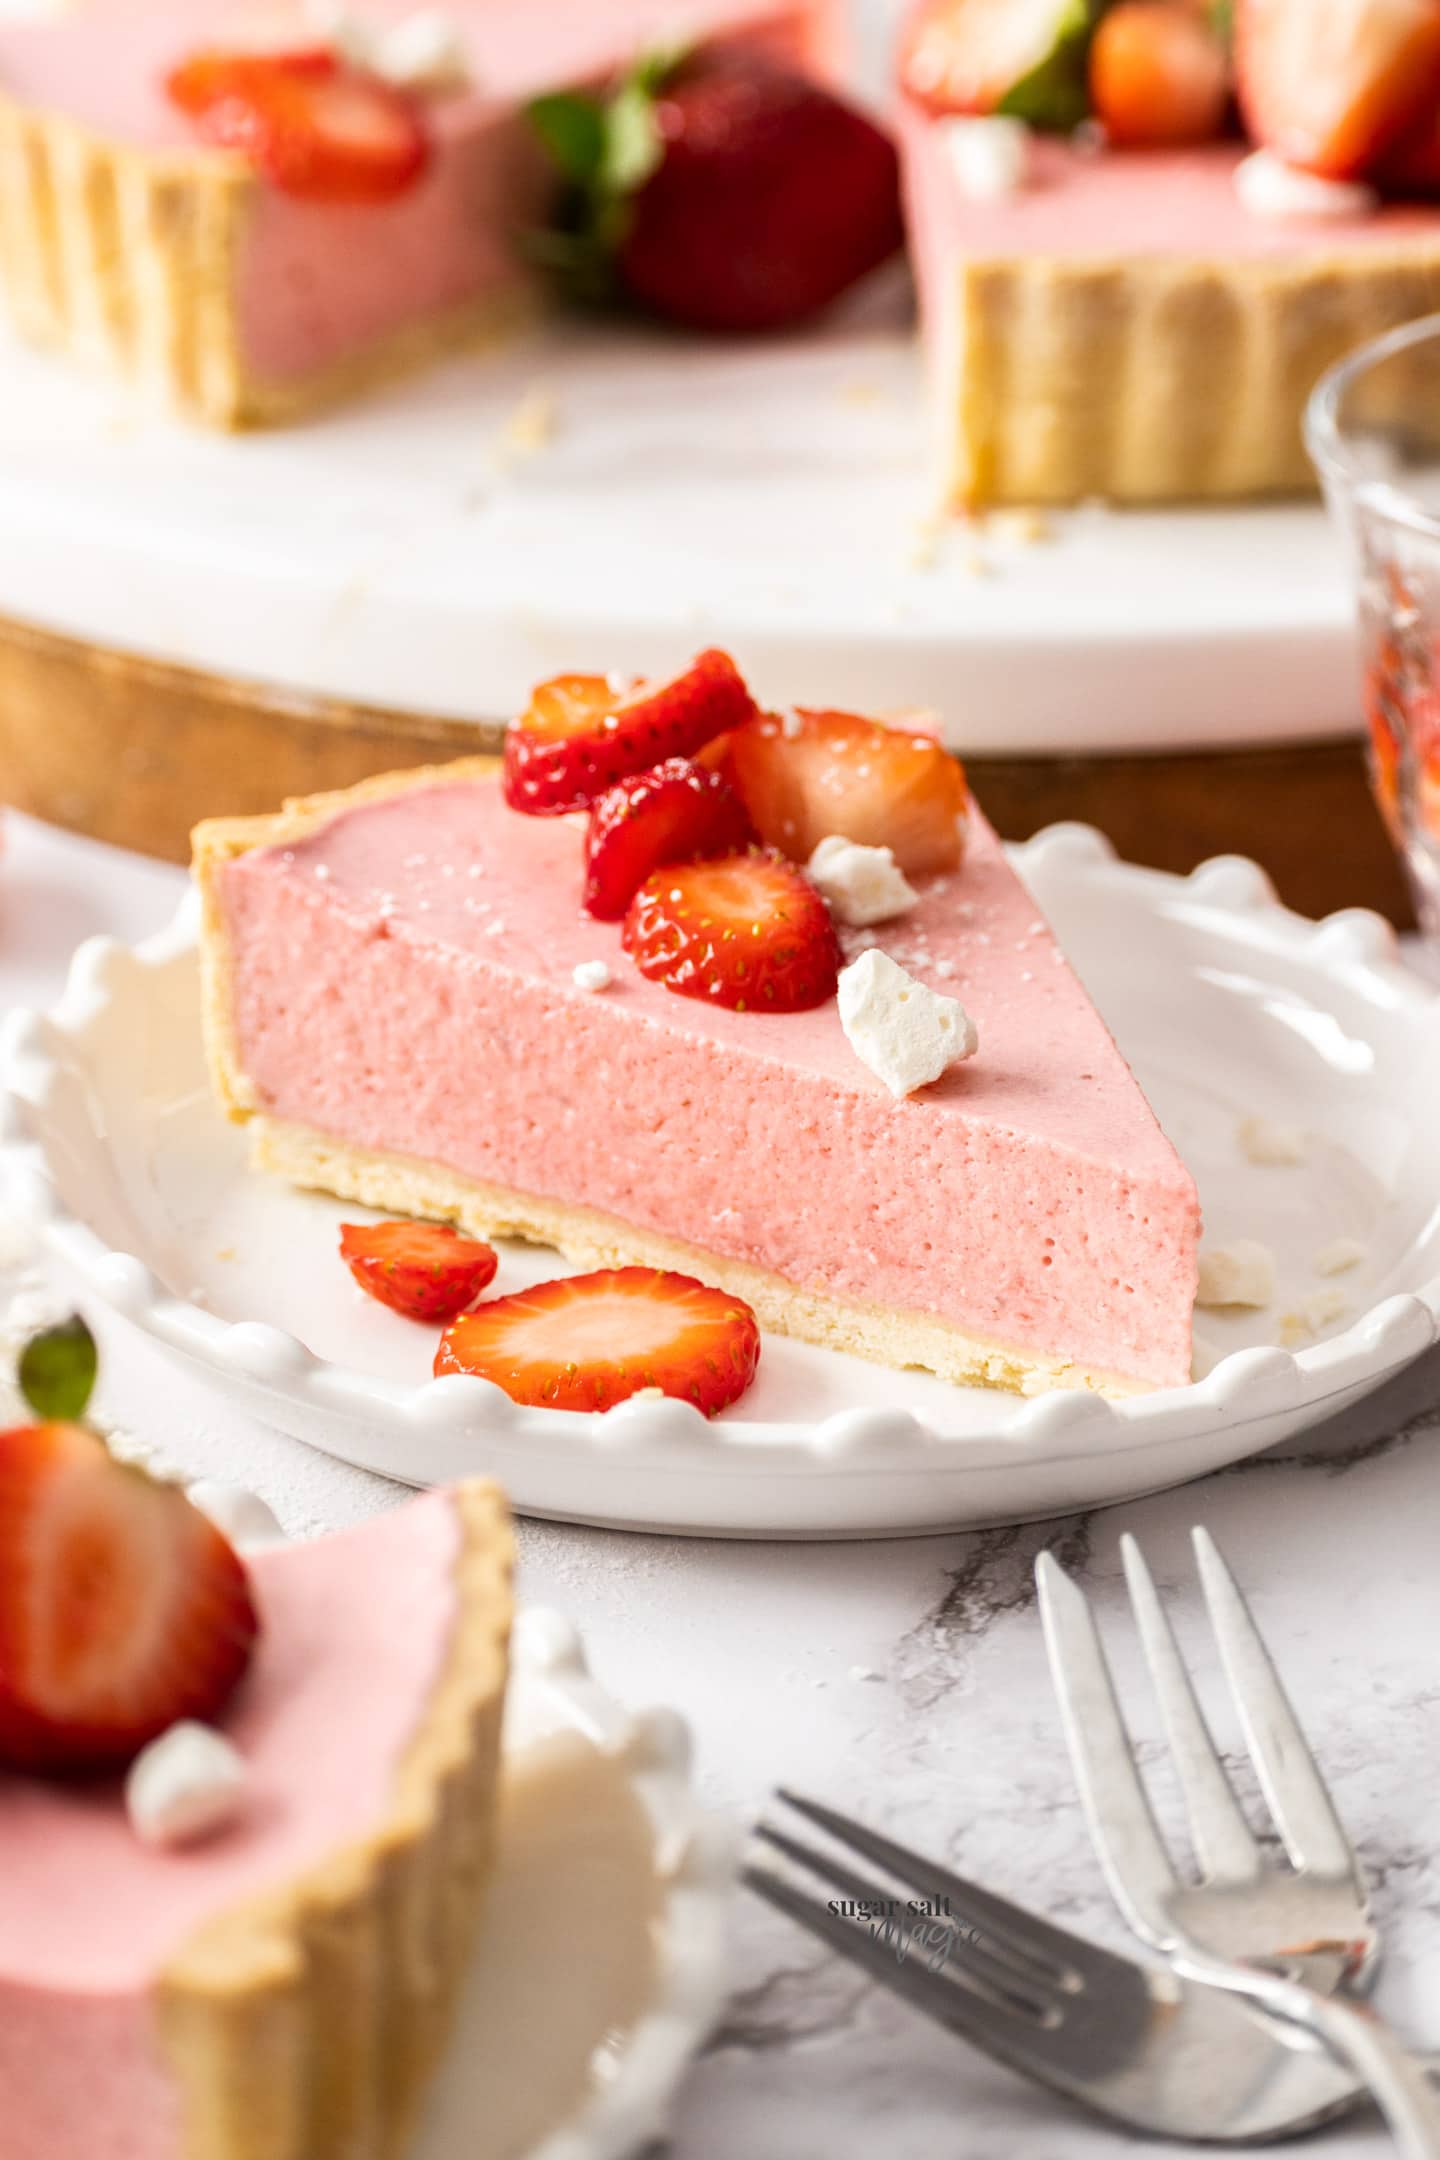 A slice of strawberry mousse tart on a small dessert plate.